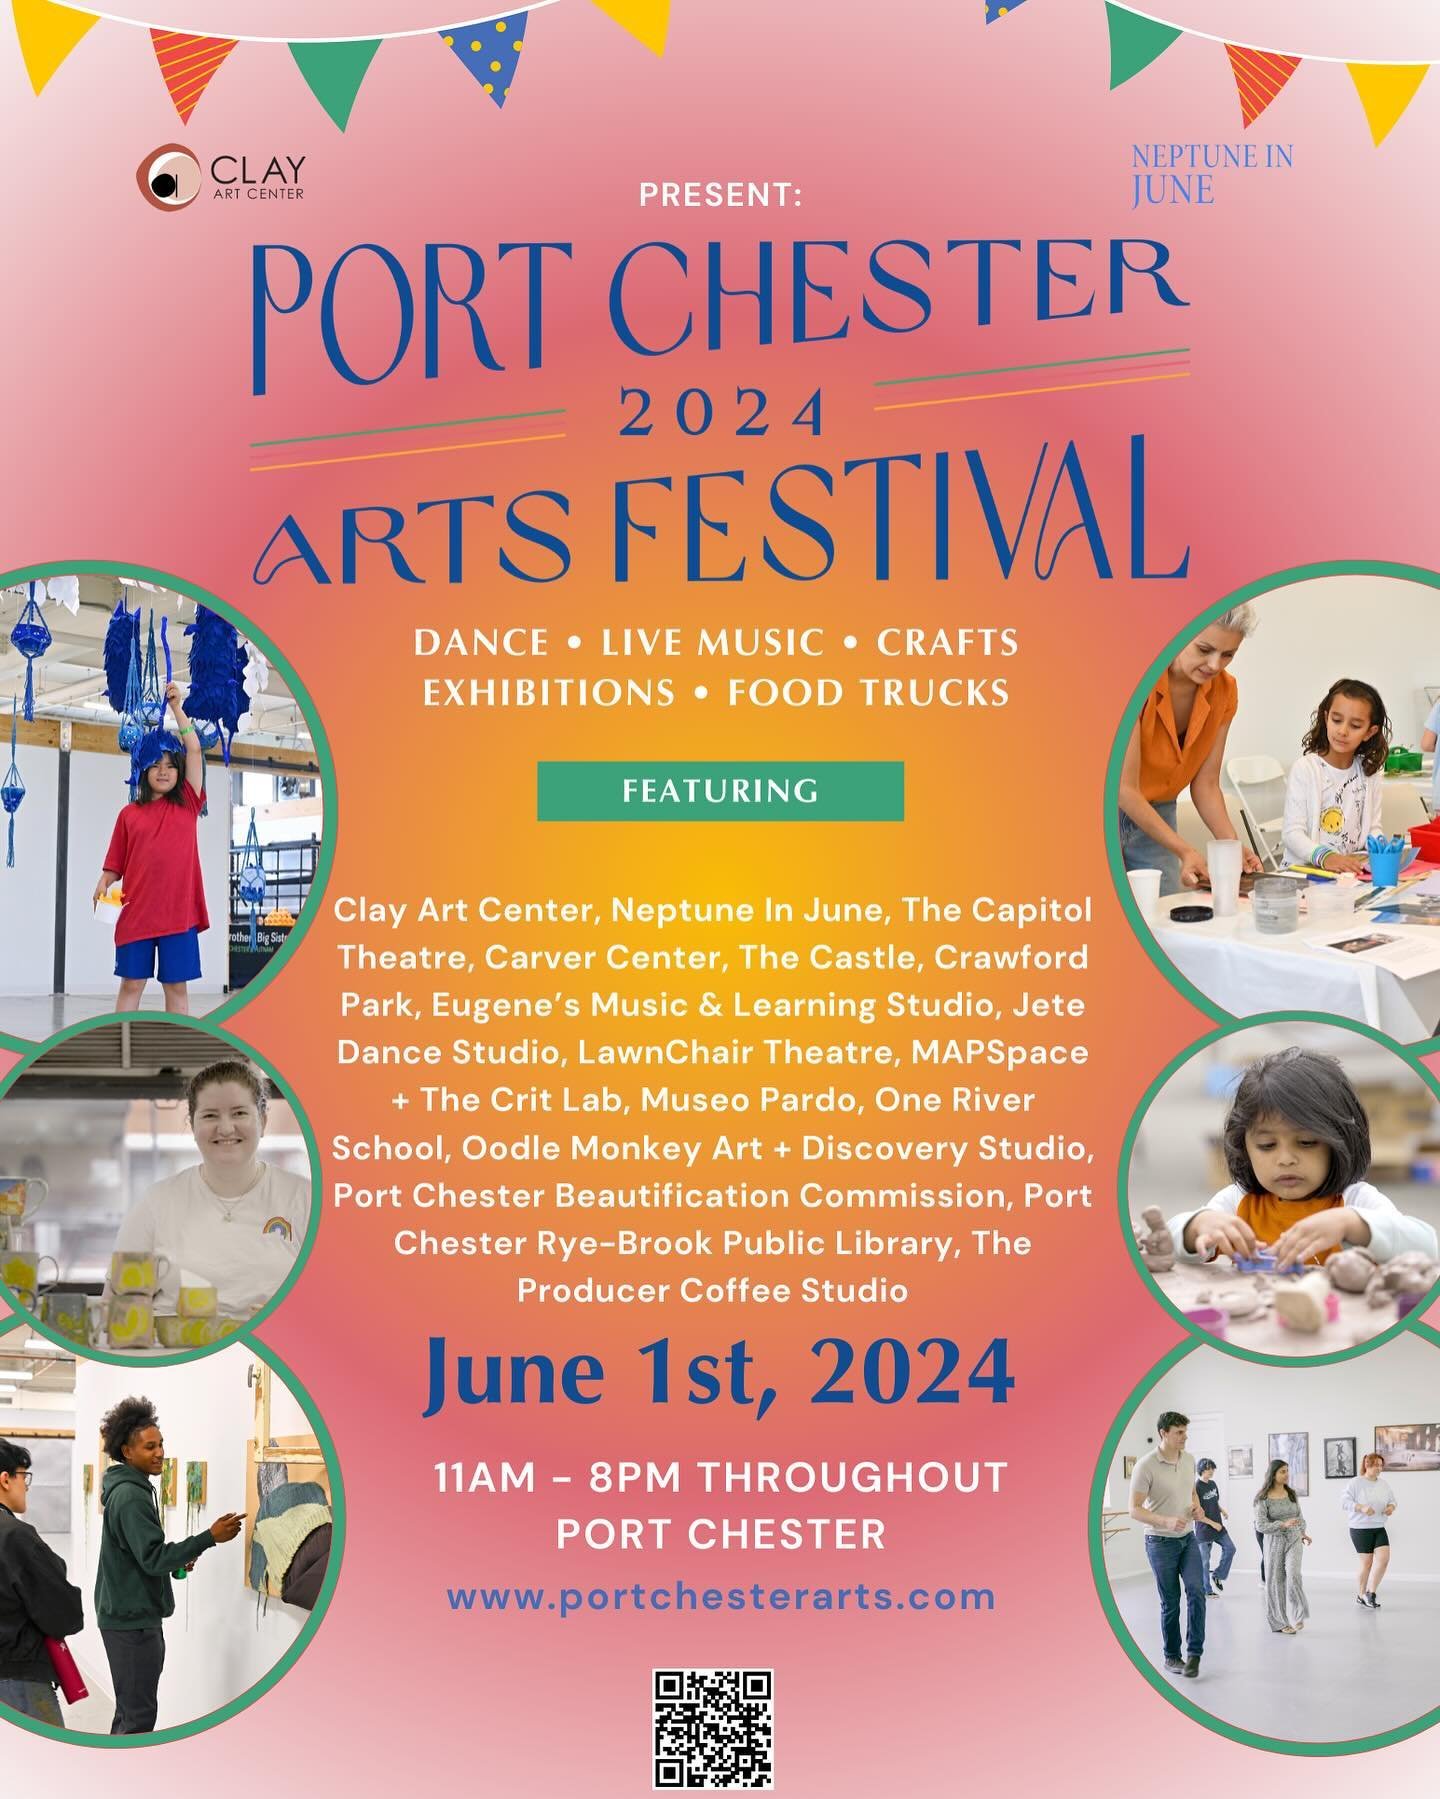 Mark your calendars! On June 1st, 2024 from 11am to 8pm, Clay Art Center and Neptune In June will present the Second Annual Port Chester Arts Festival! The festival celebrates the arts groups and artists that make Port Chester a creative and cultural